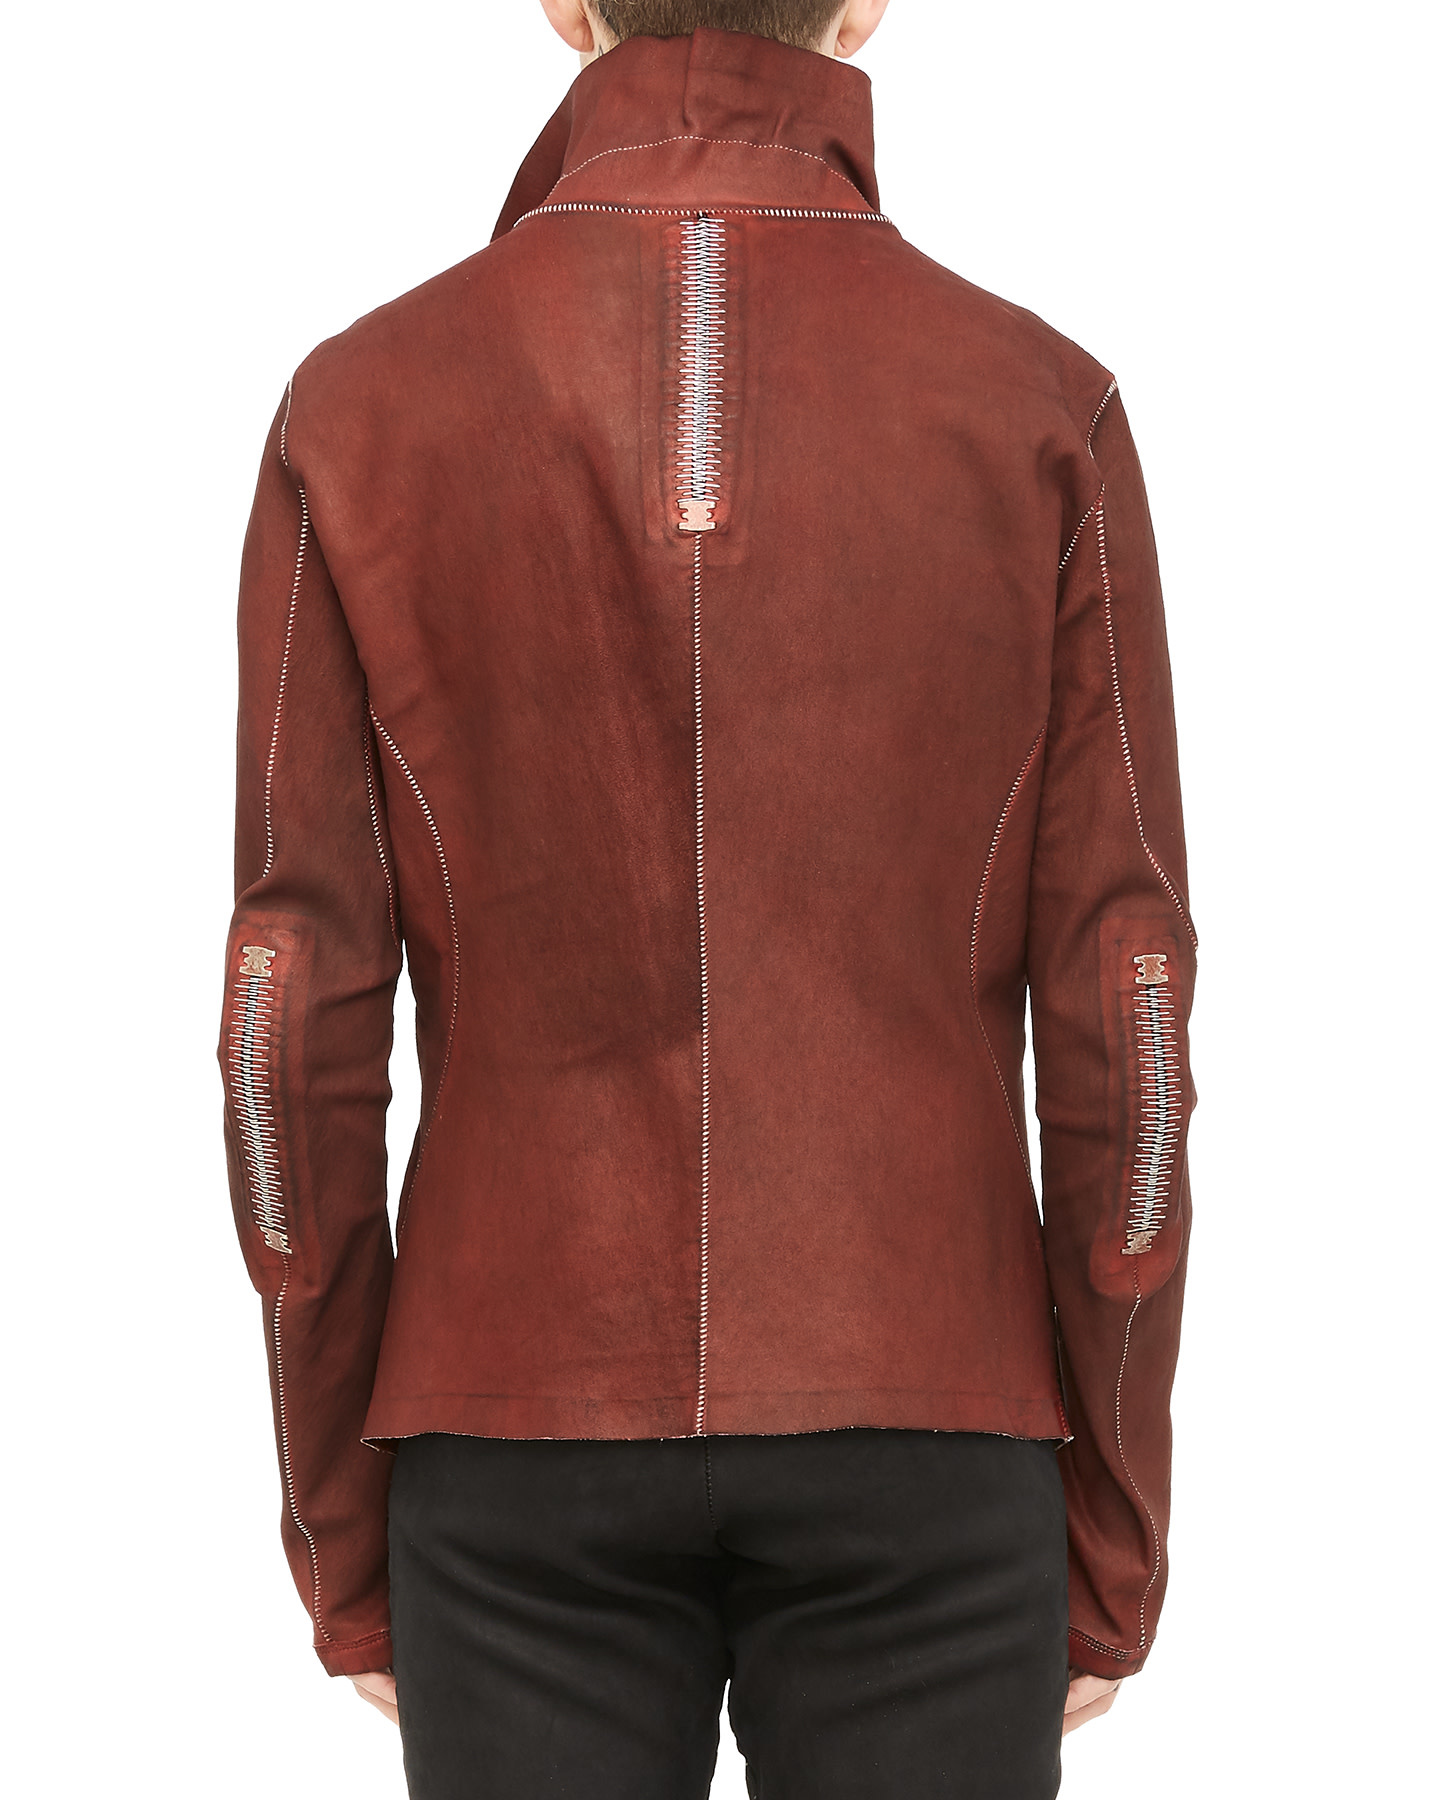 Imparable Stretch Leather Jacket - Dirty Red by Isaac Sellam